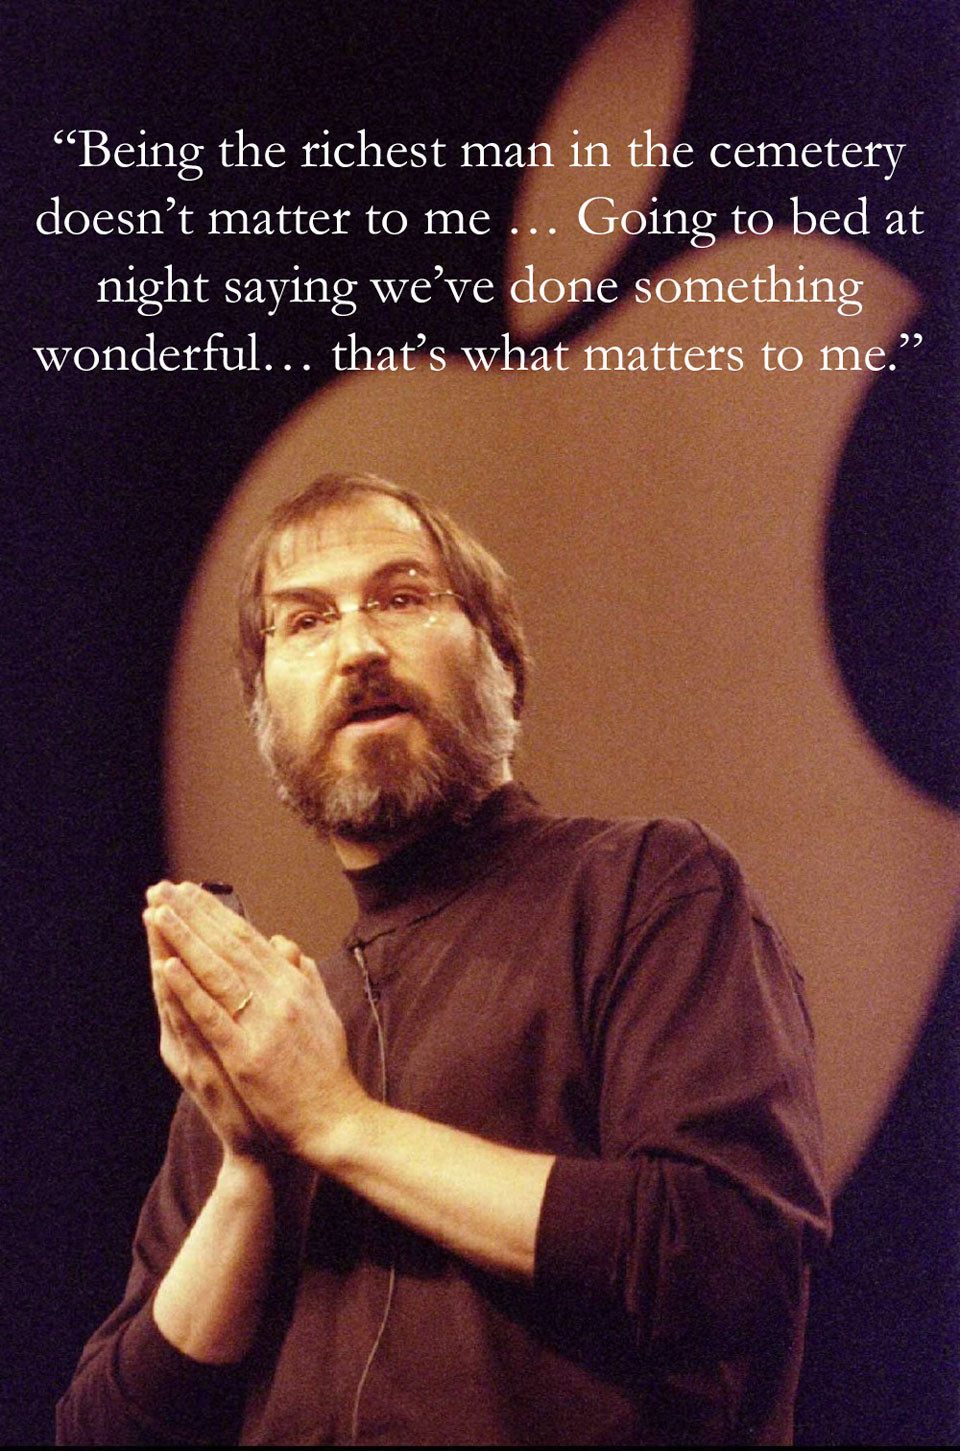 Steve Jobs Motivational Quotes
 Inspirational Quotes From Steve Jobs 04